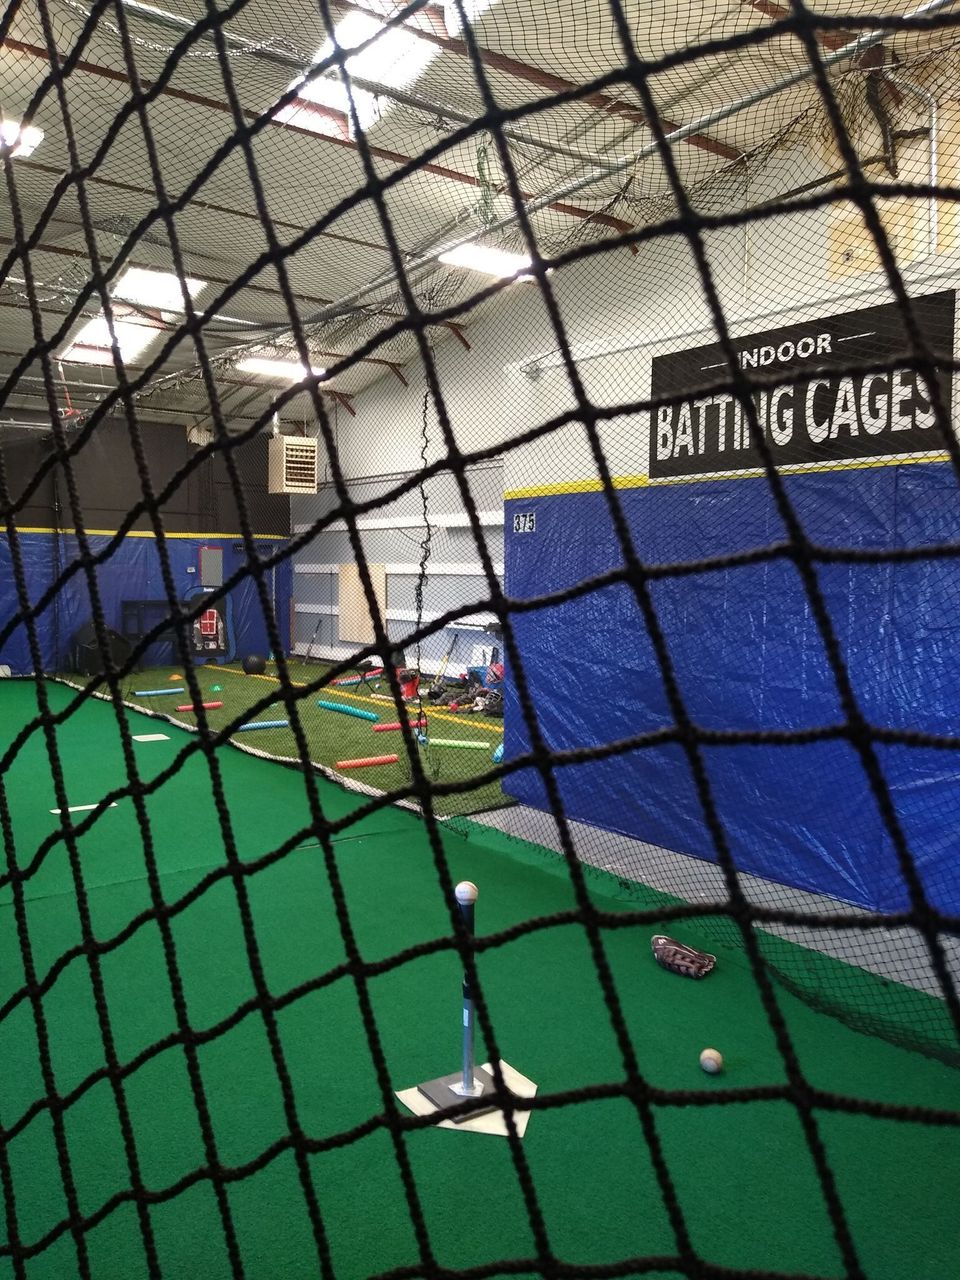 Indoor batting cage hitting cage